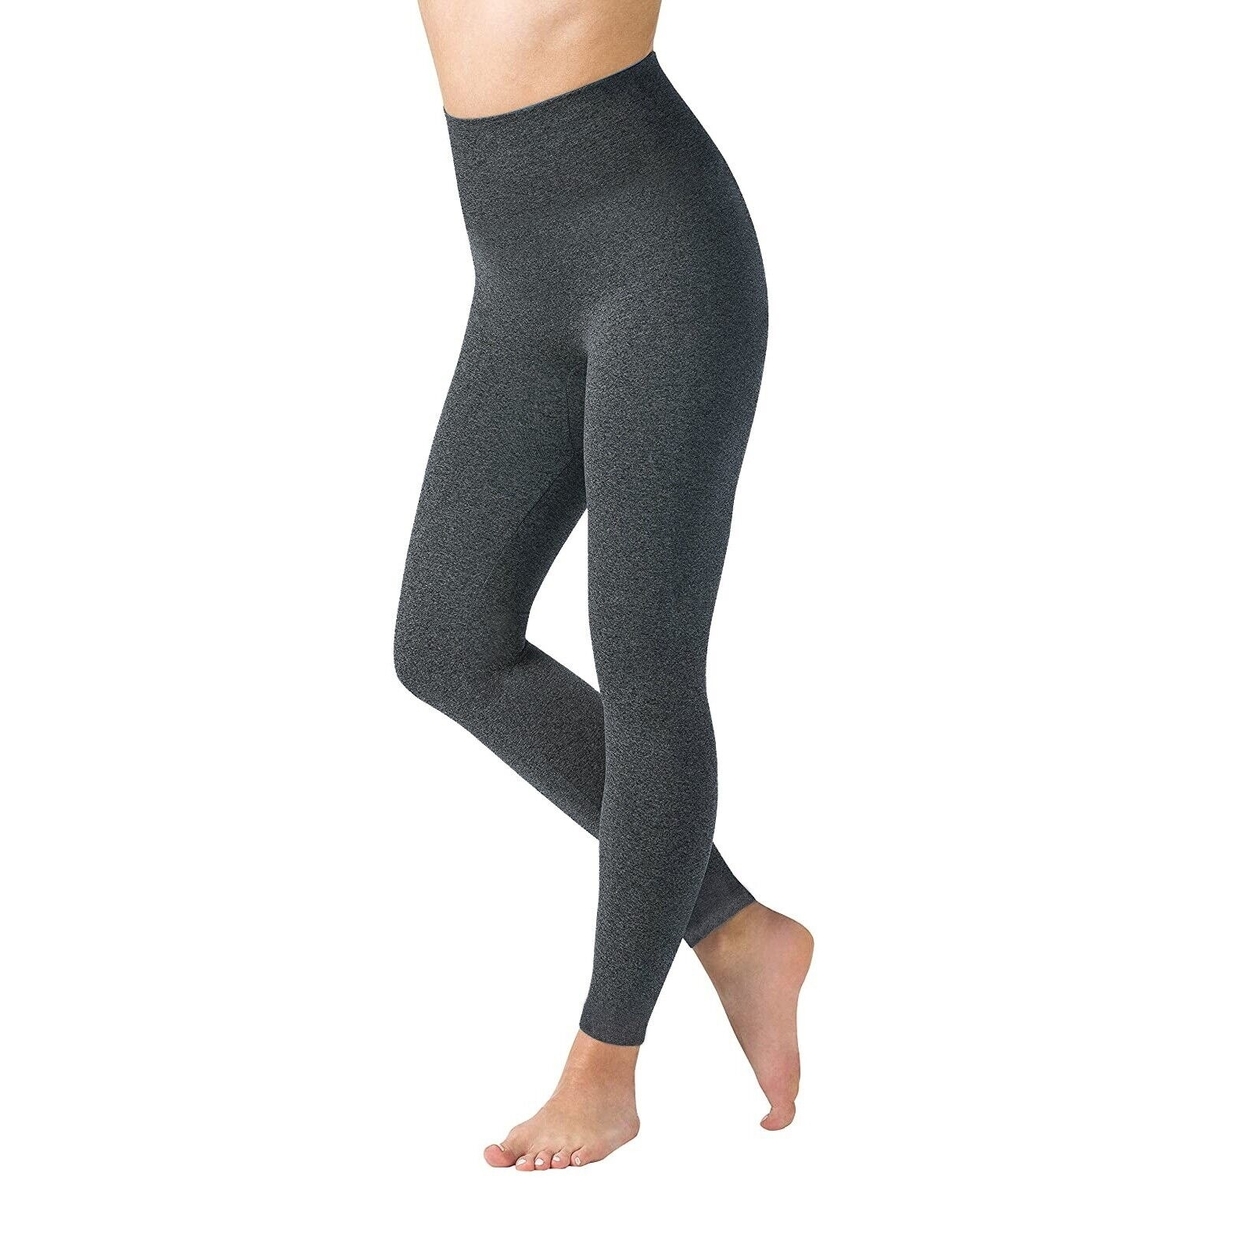 Women's Winter Warm Marled High Waist Fleece Lined Thick Thermal Leggings Pants - Charcoal, 1x